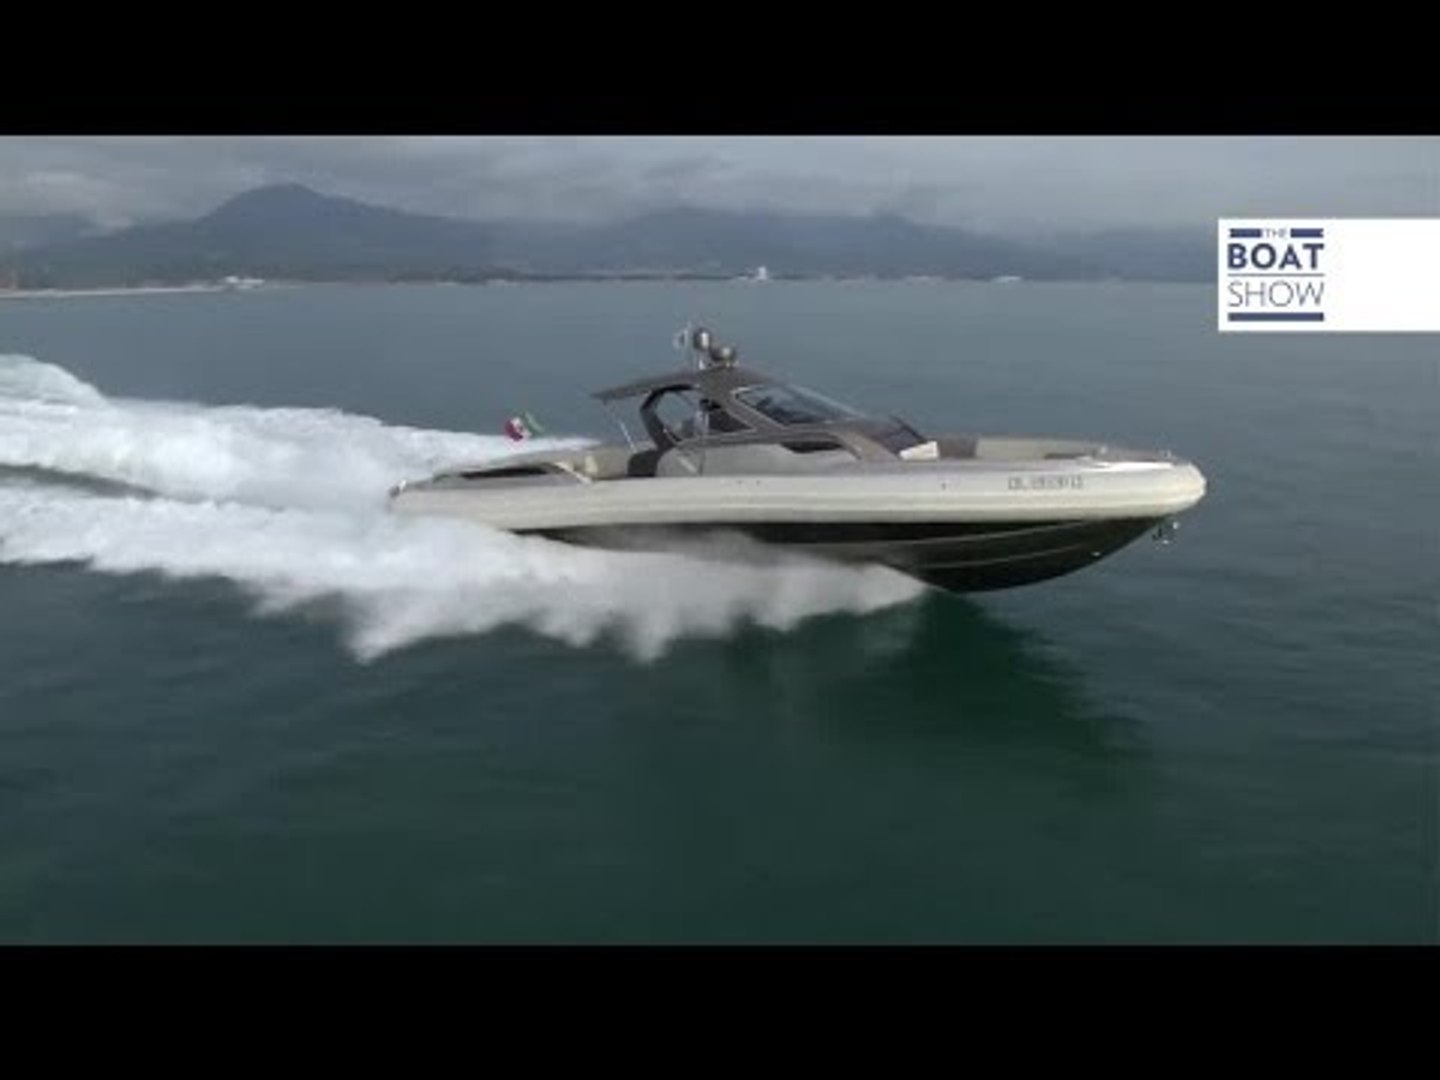 SACS STRIDER 18 - Review - The Boat Show - video Dailymotion